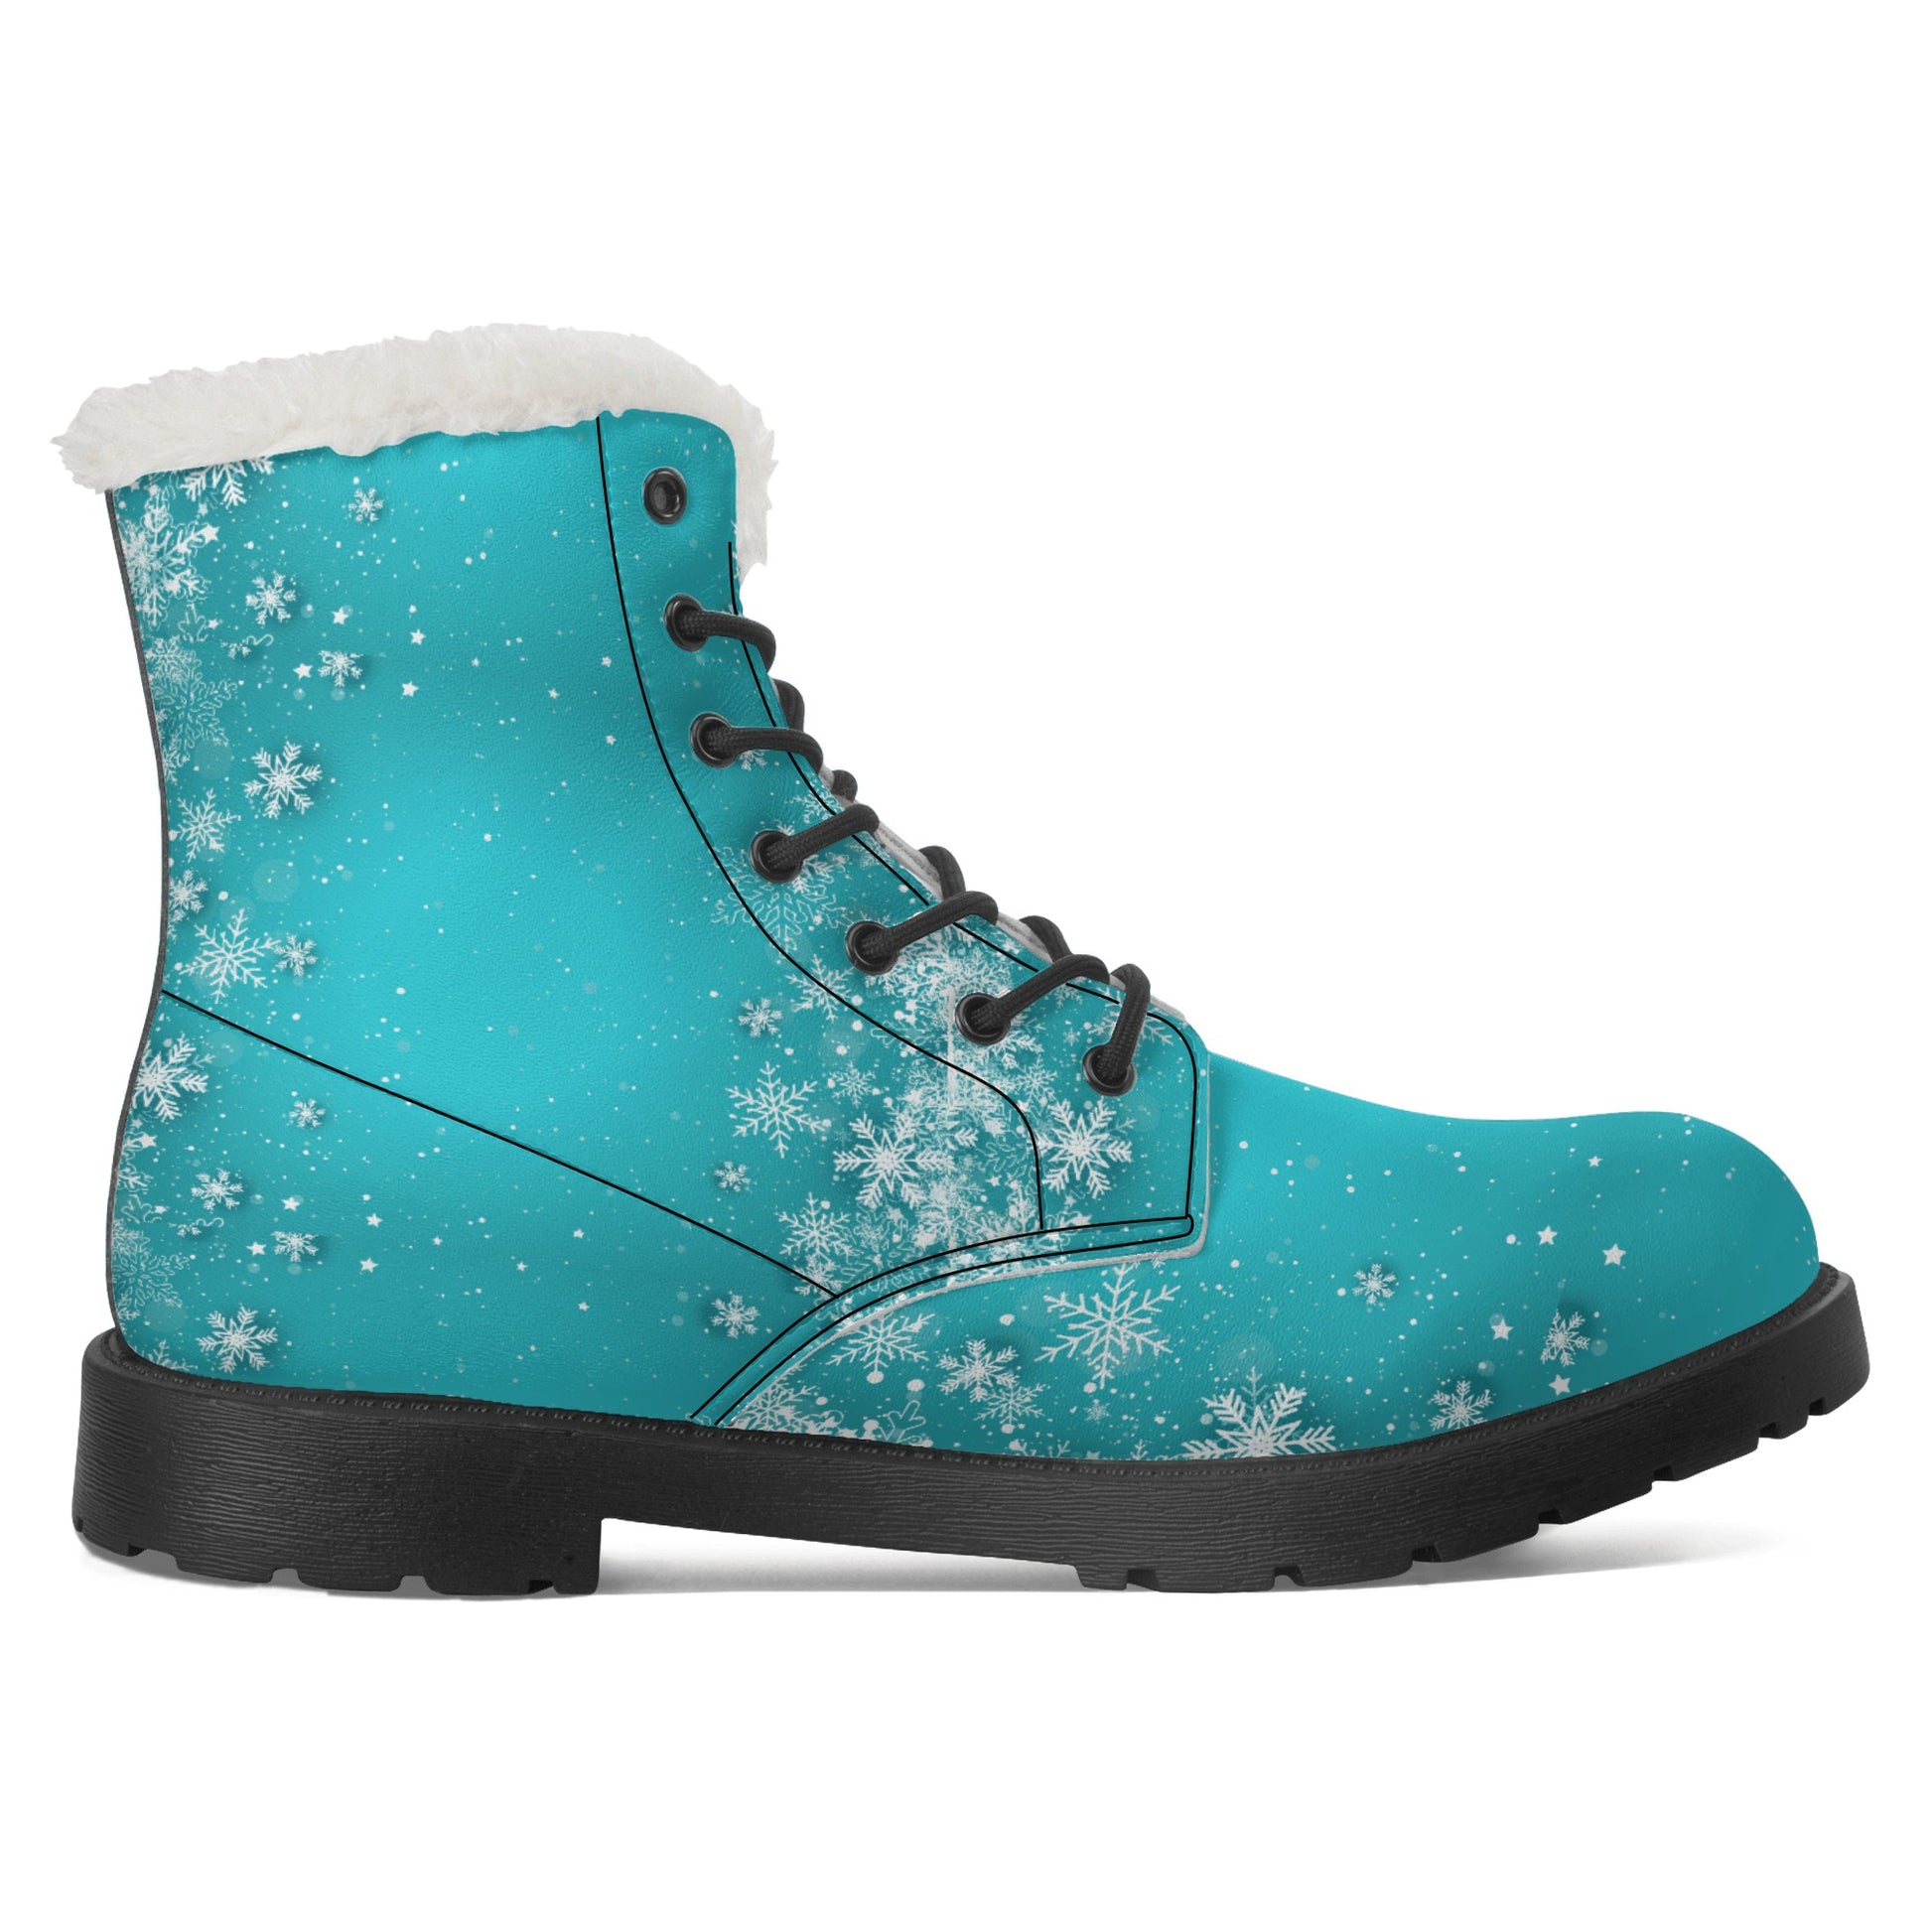 Stand out  with the  frost bite Womens Faux Fur Leather Boots  available at Hey Nugget. Grab yours today!